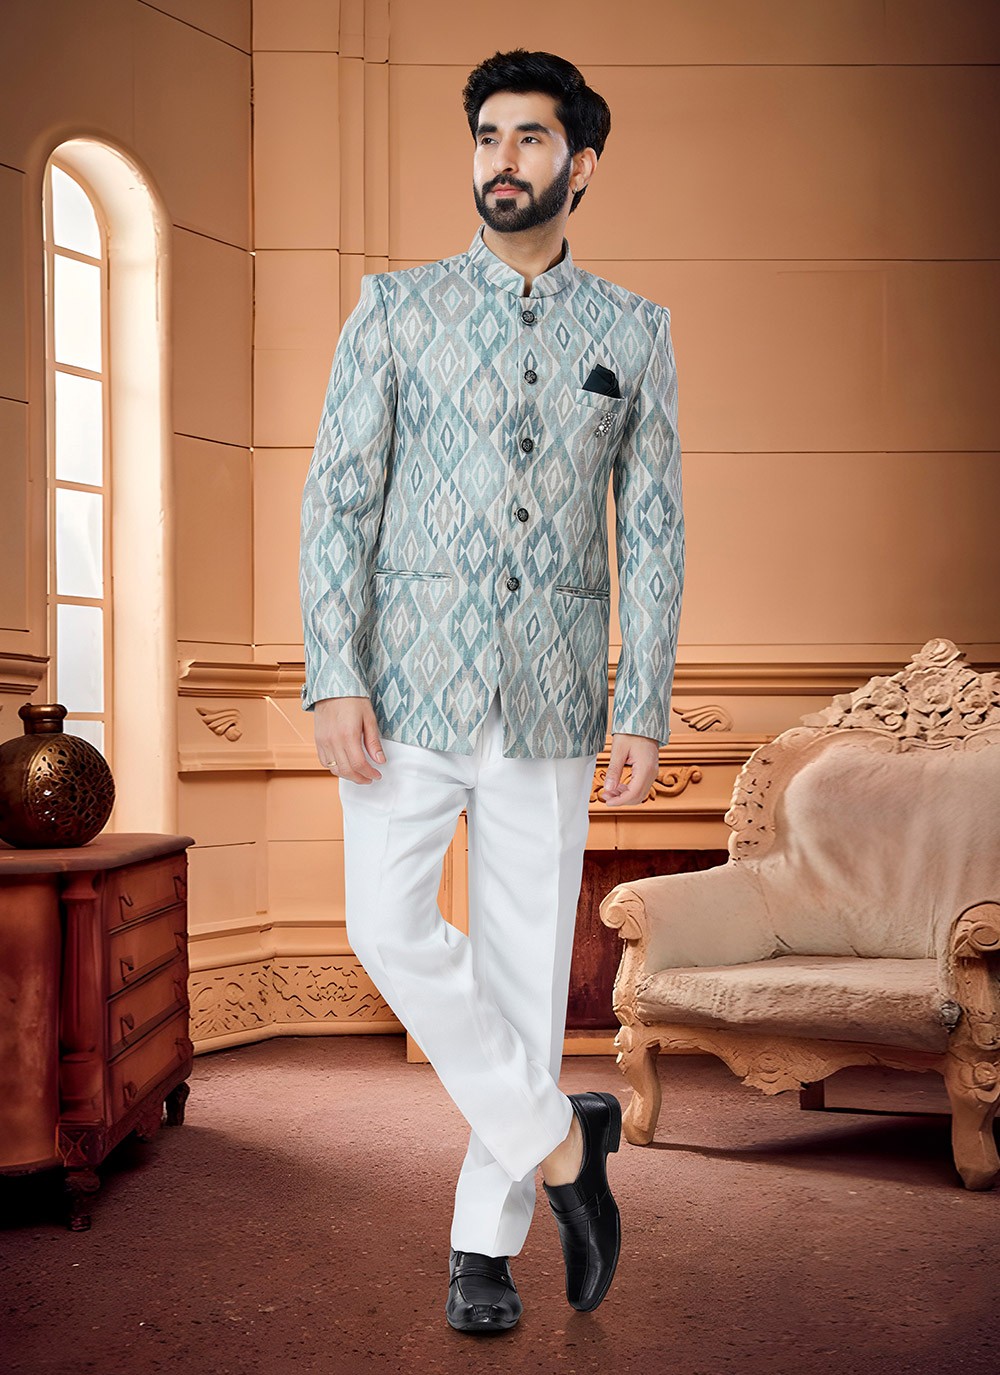 Jodhapuri Suits For Men: The Royal Outfit In Indian Fashion | by Korabynm |  Medium